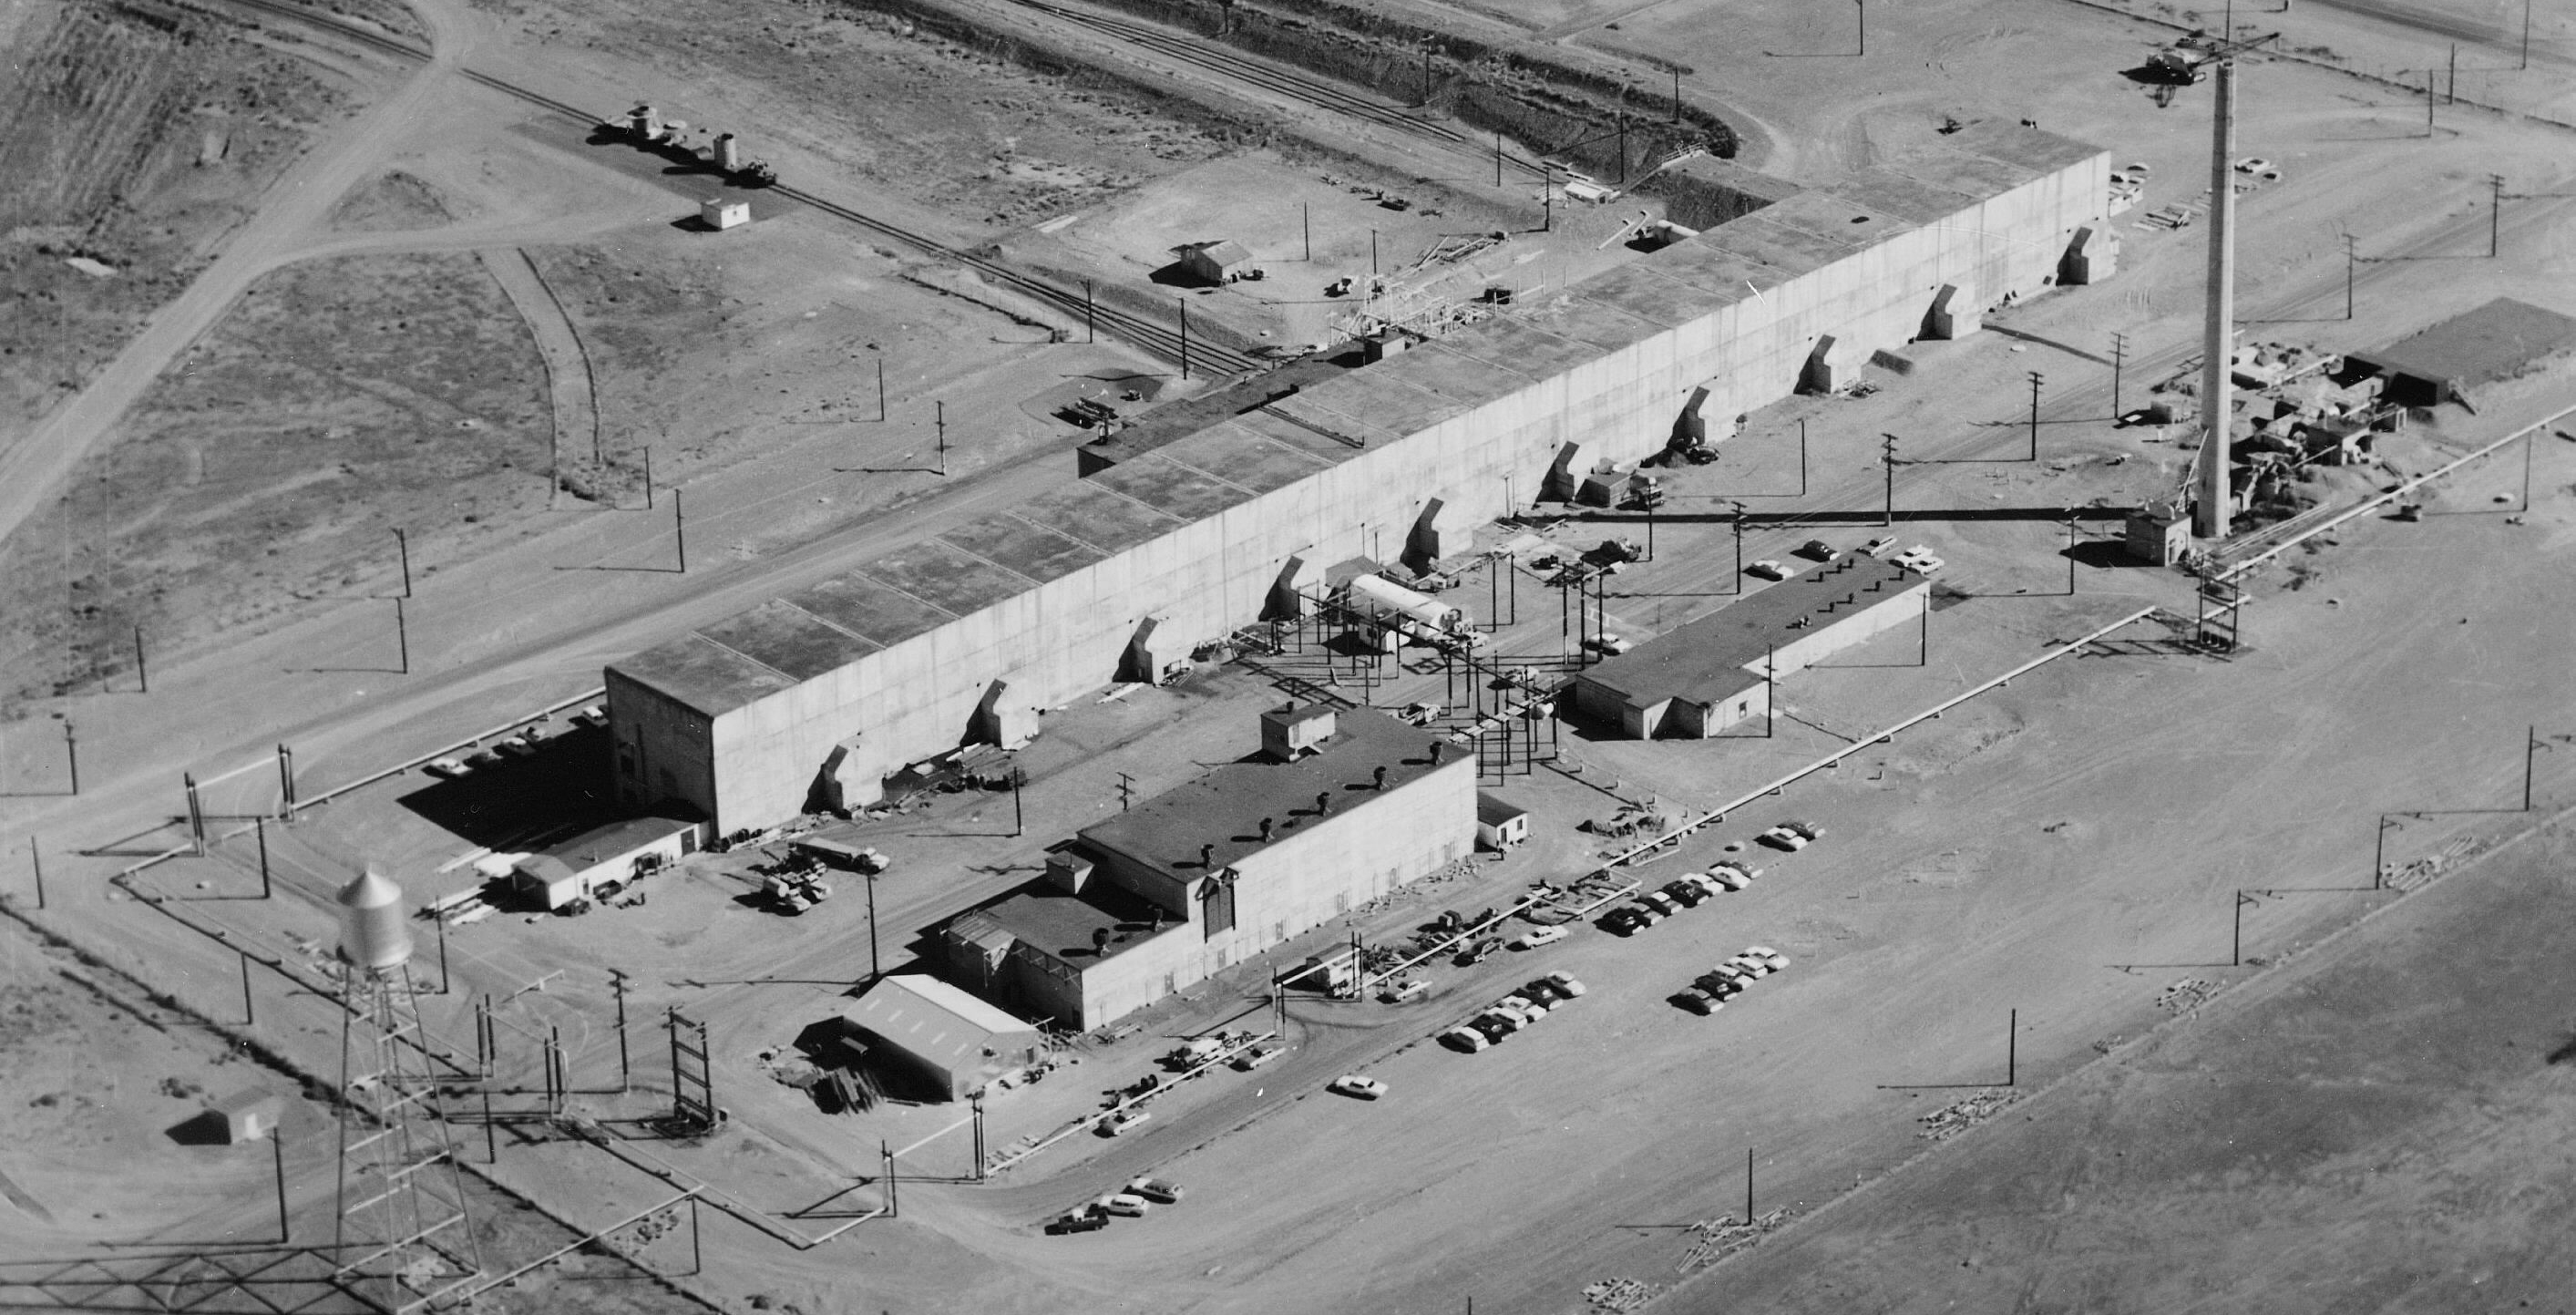 On December 2, 1949, the Atomic Energy Commission and the United States Air Force conducted the “Green Run” experiment at the Hanford Nuclear prod